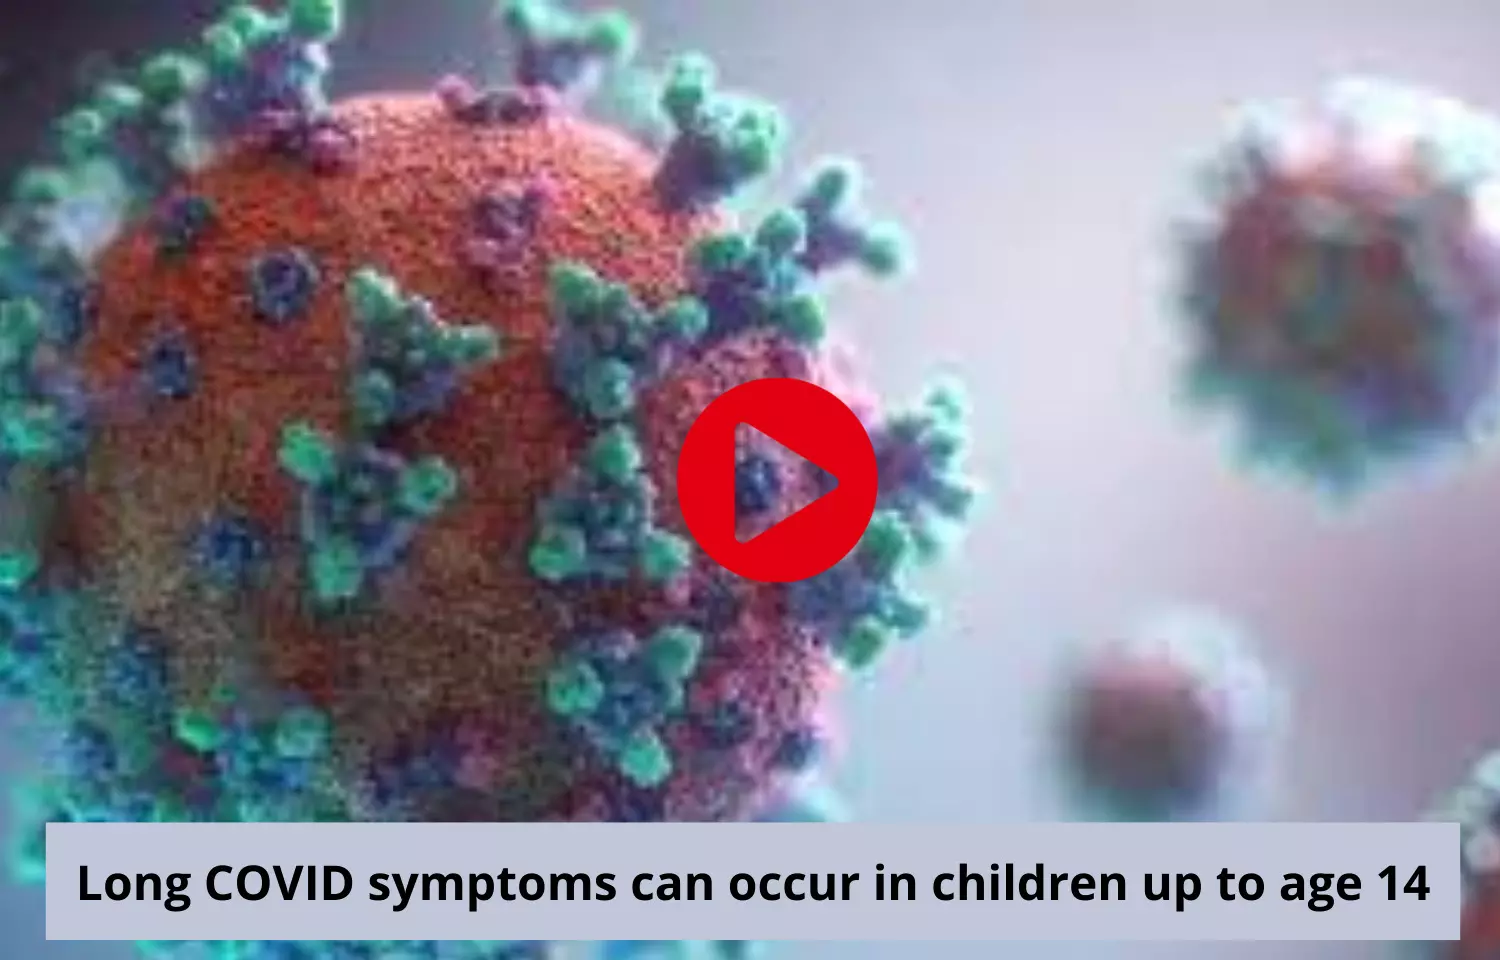 Long COVID symptoms can occur in children up to age 14